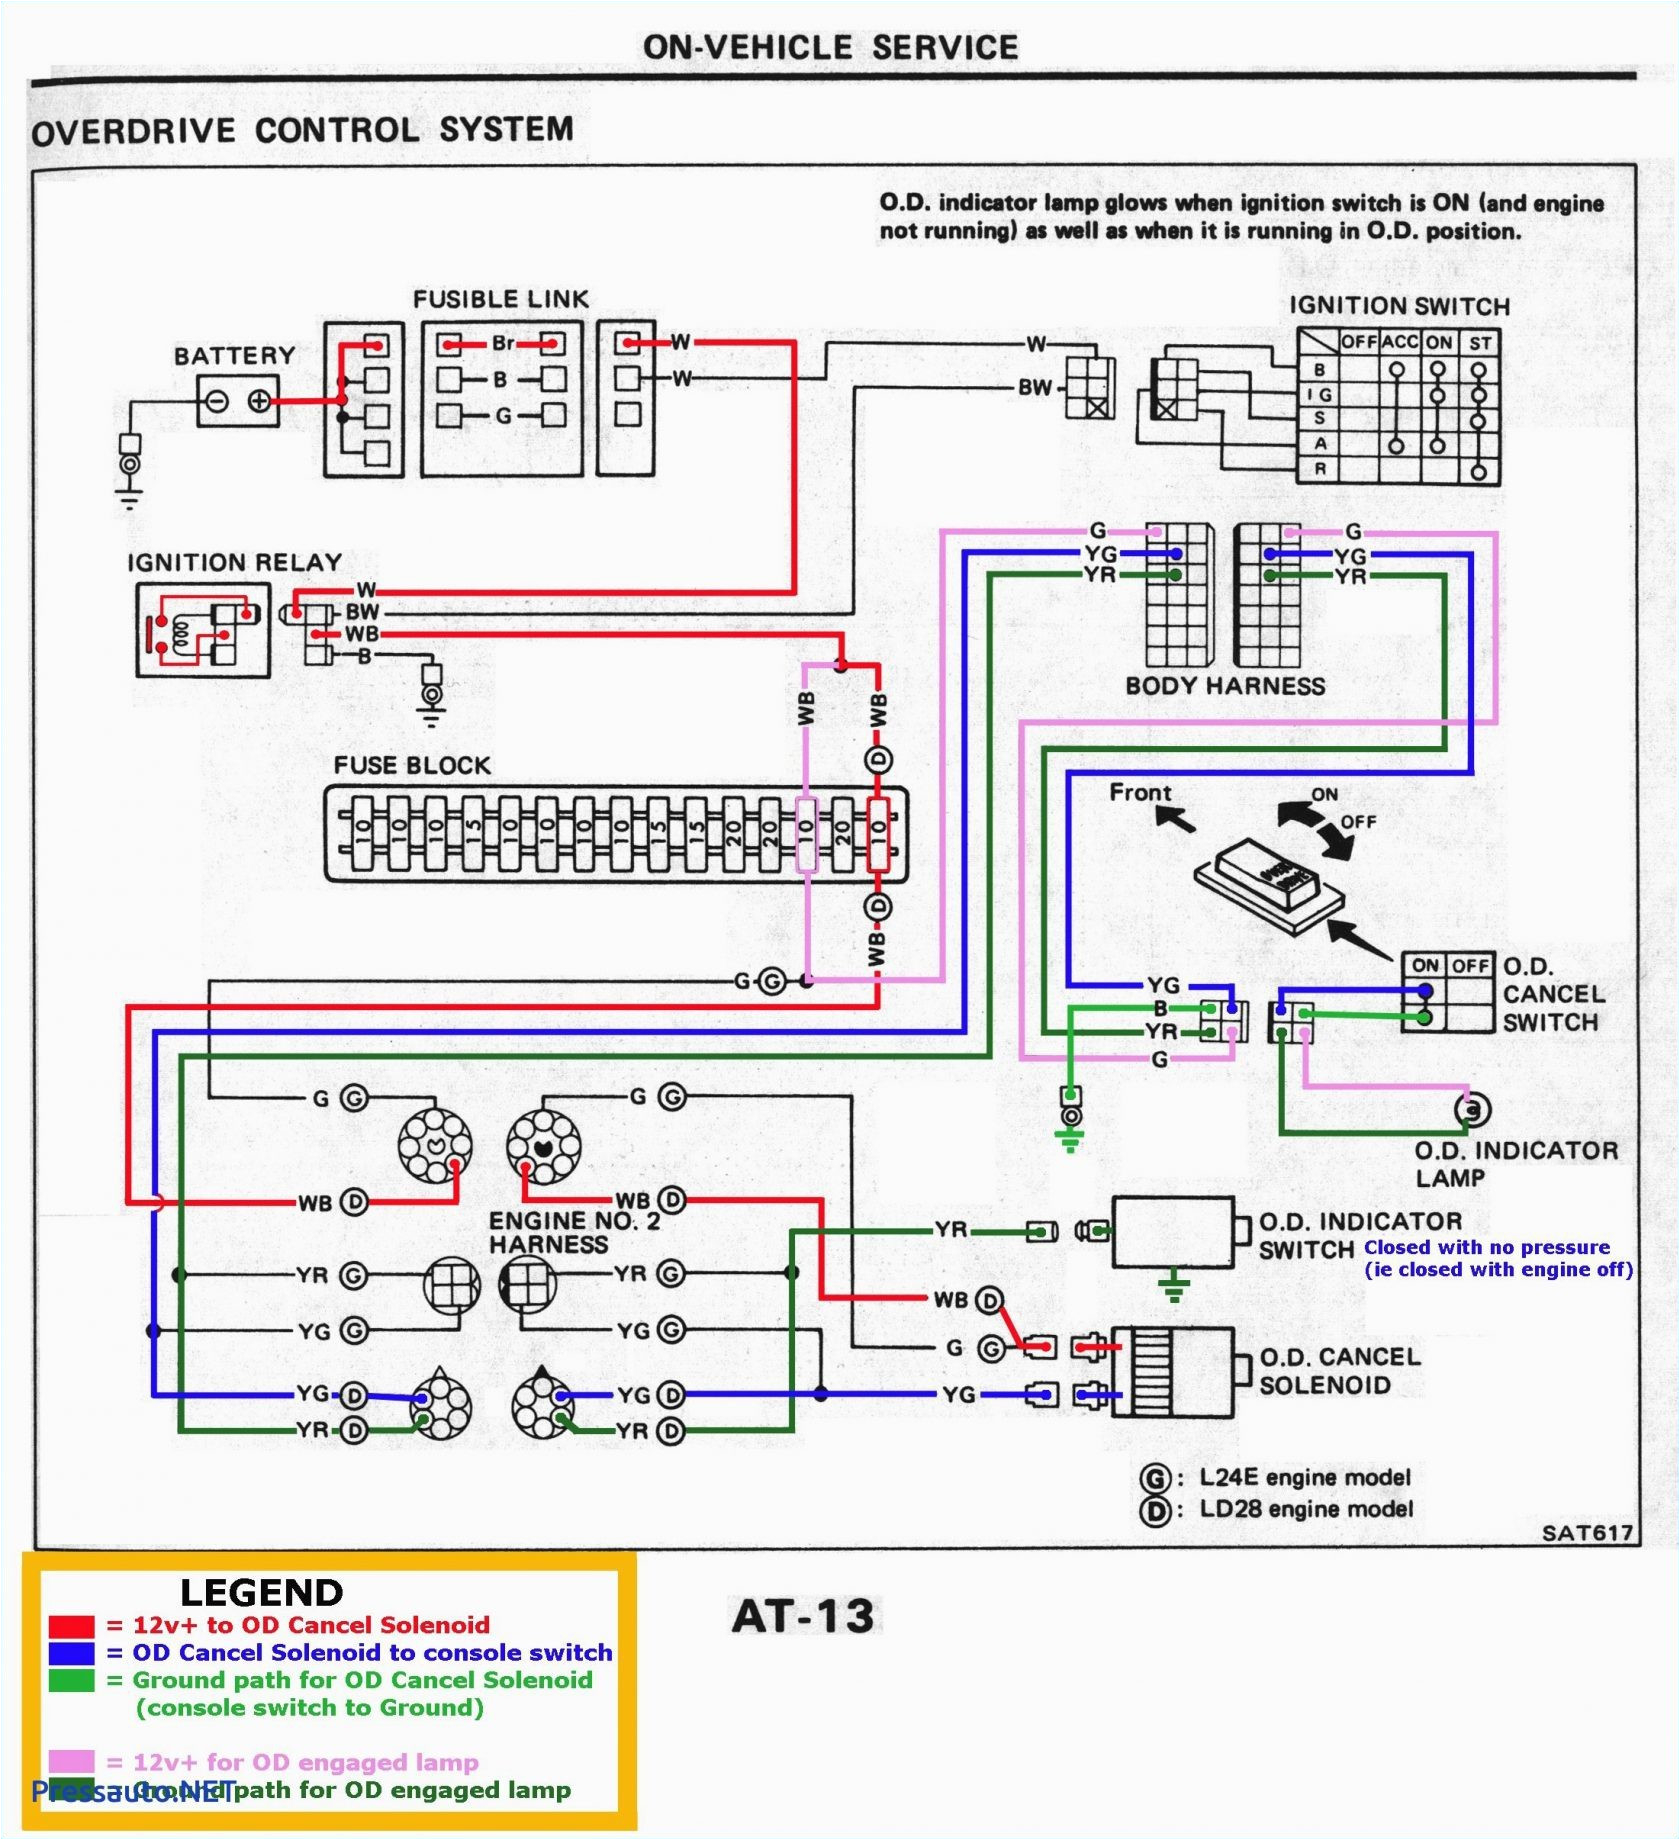 fuel pump relay location on 2000 ford taurus air conditioning wiring 2002 buick rendezvous fuel pump location free download wiring